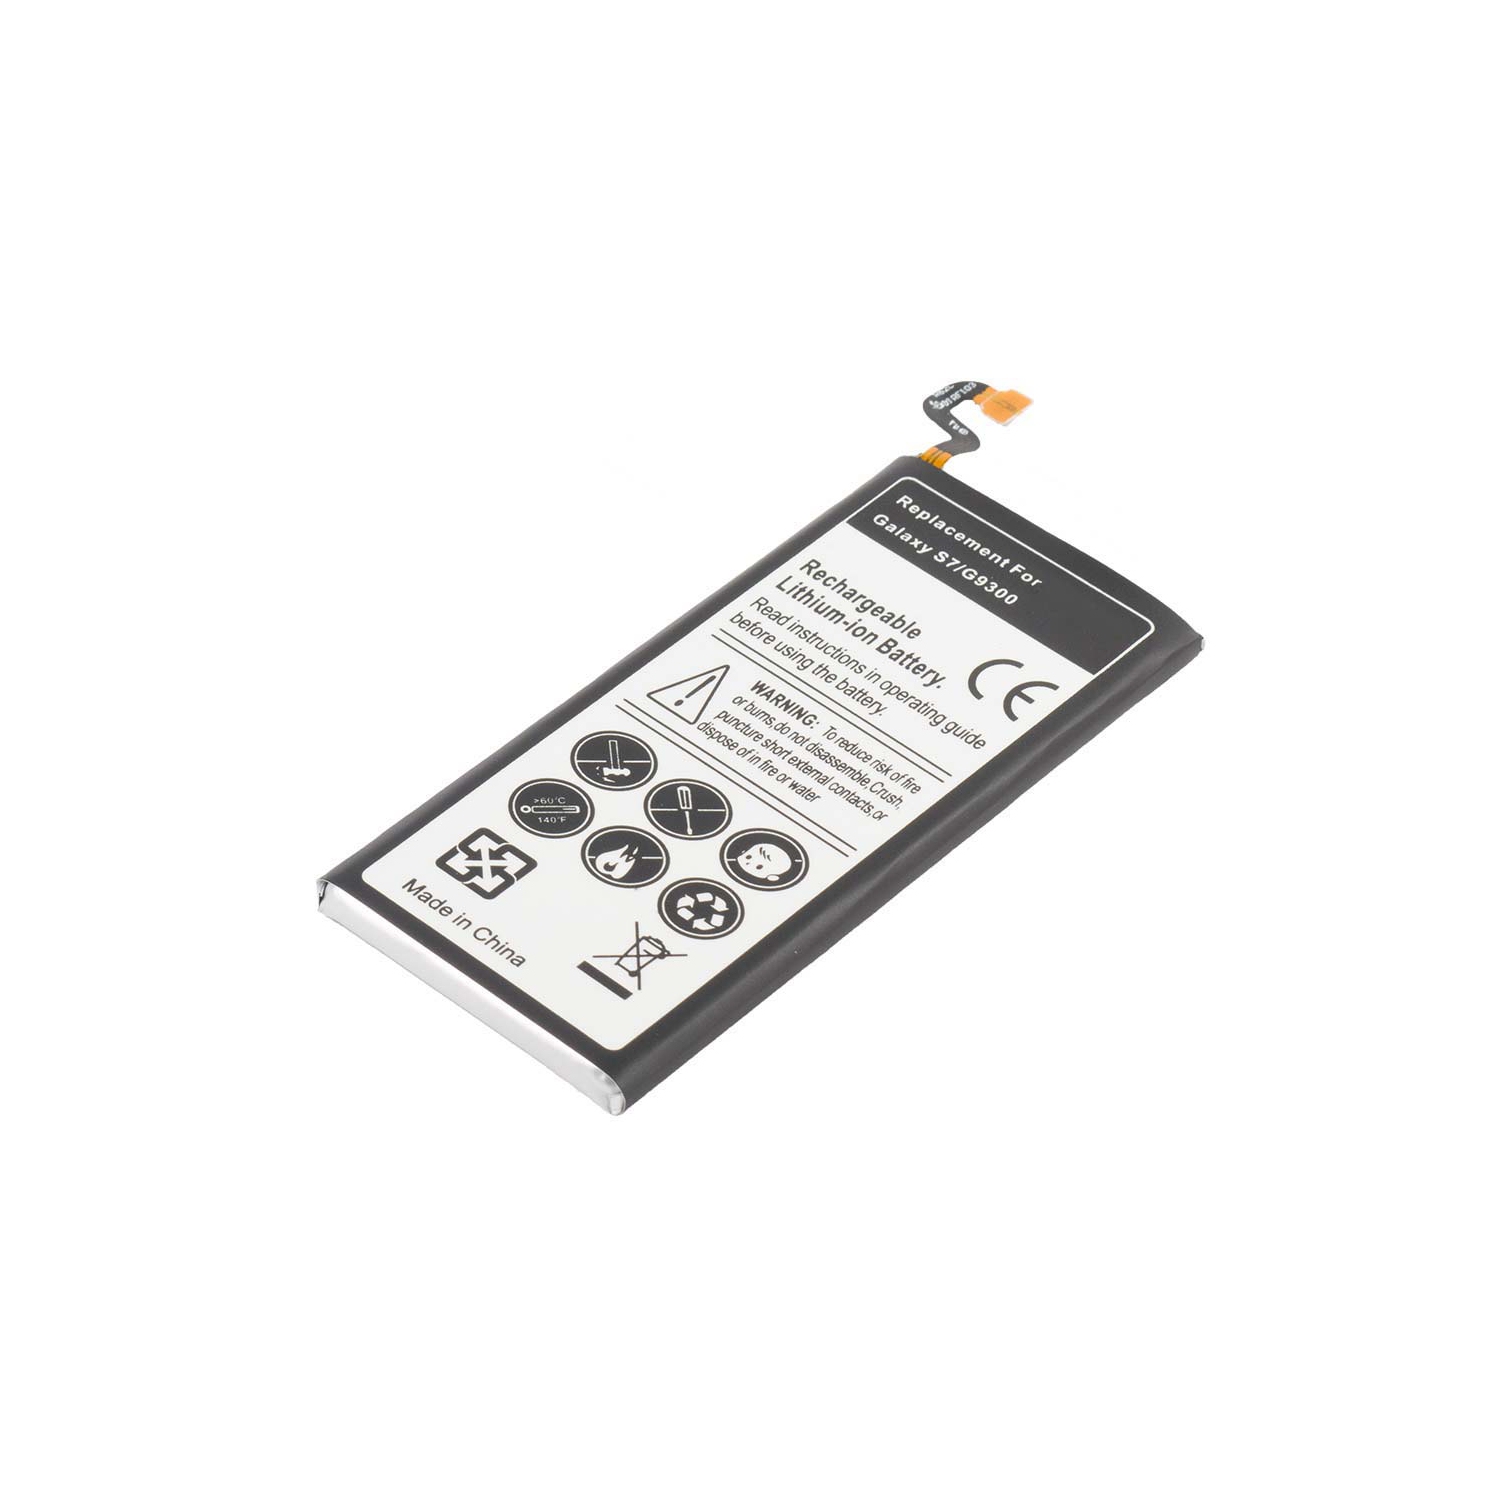 Dr. Battery - Canadian Brand Replacement Battery for Samsung Galaxy S7 - Free Shipping - 1 year limited warranty